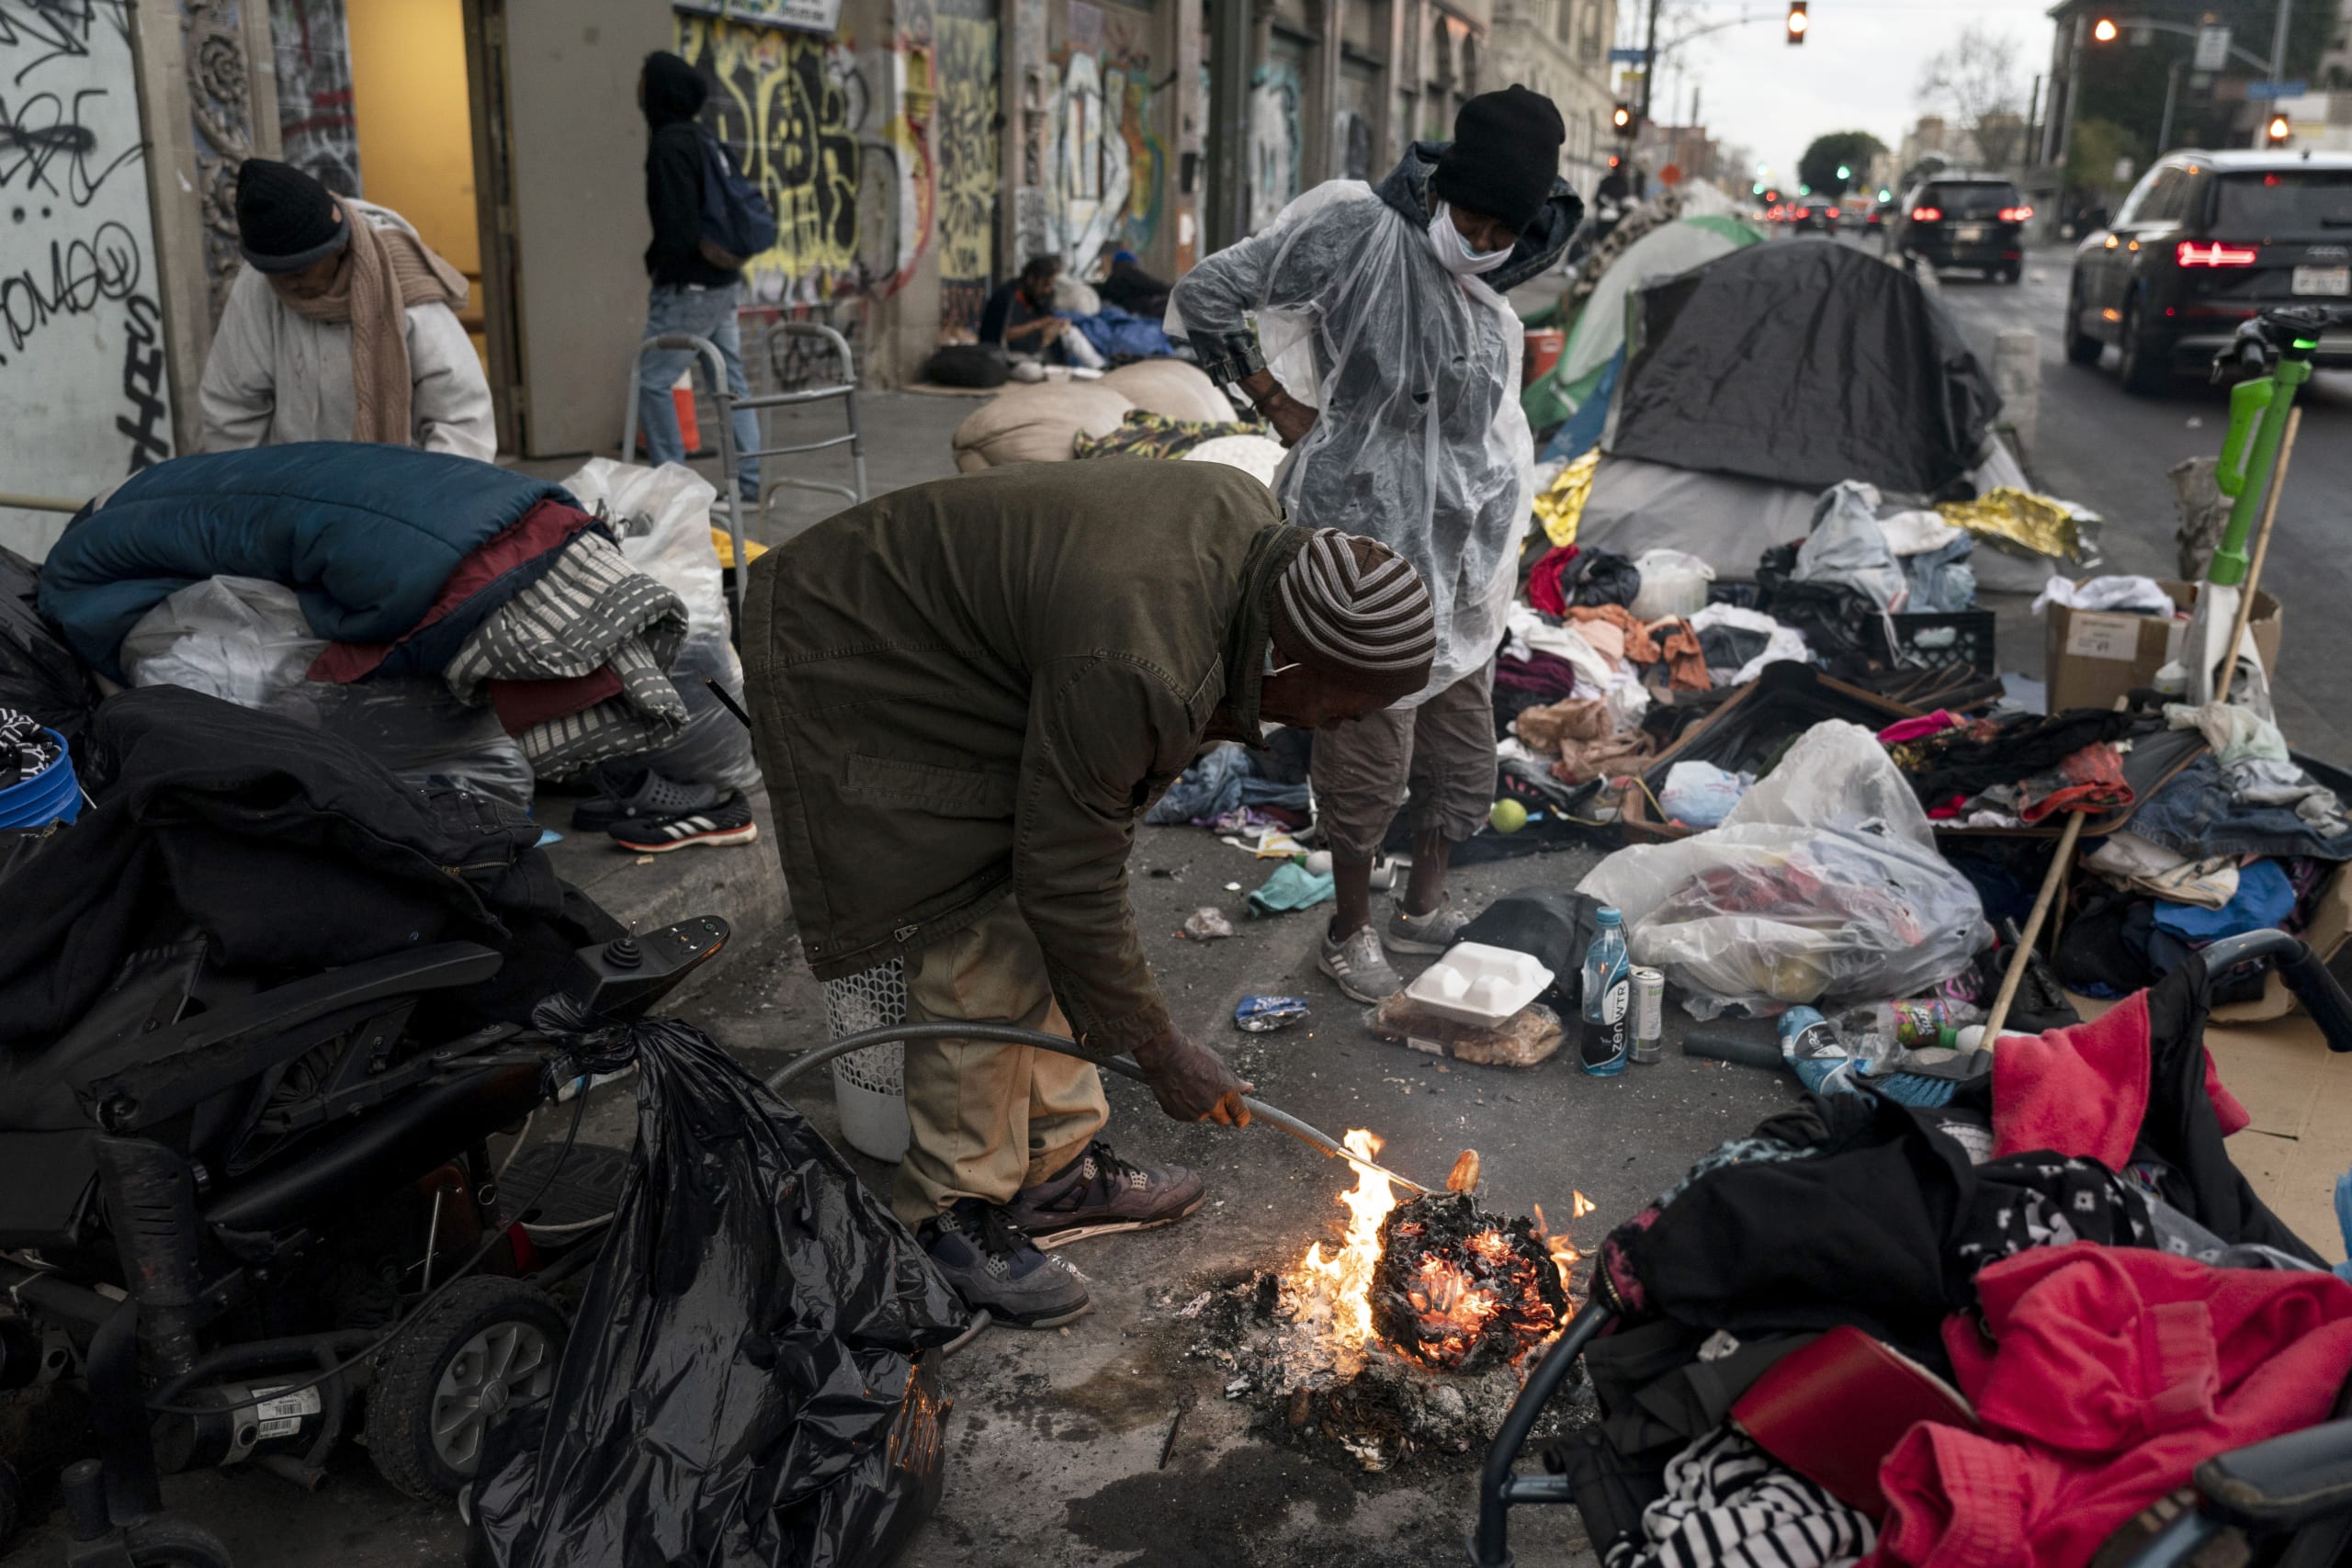 Tally: 31% of homeless in LA County comprised of Black people, nearly 4x share of population